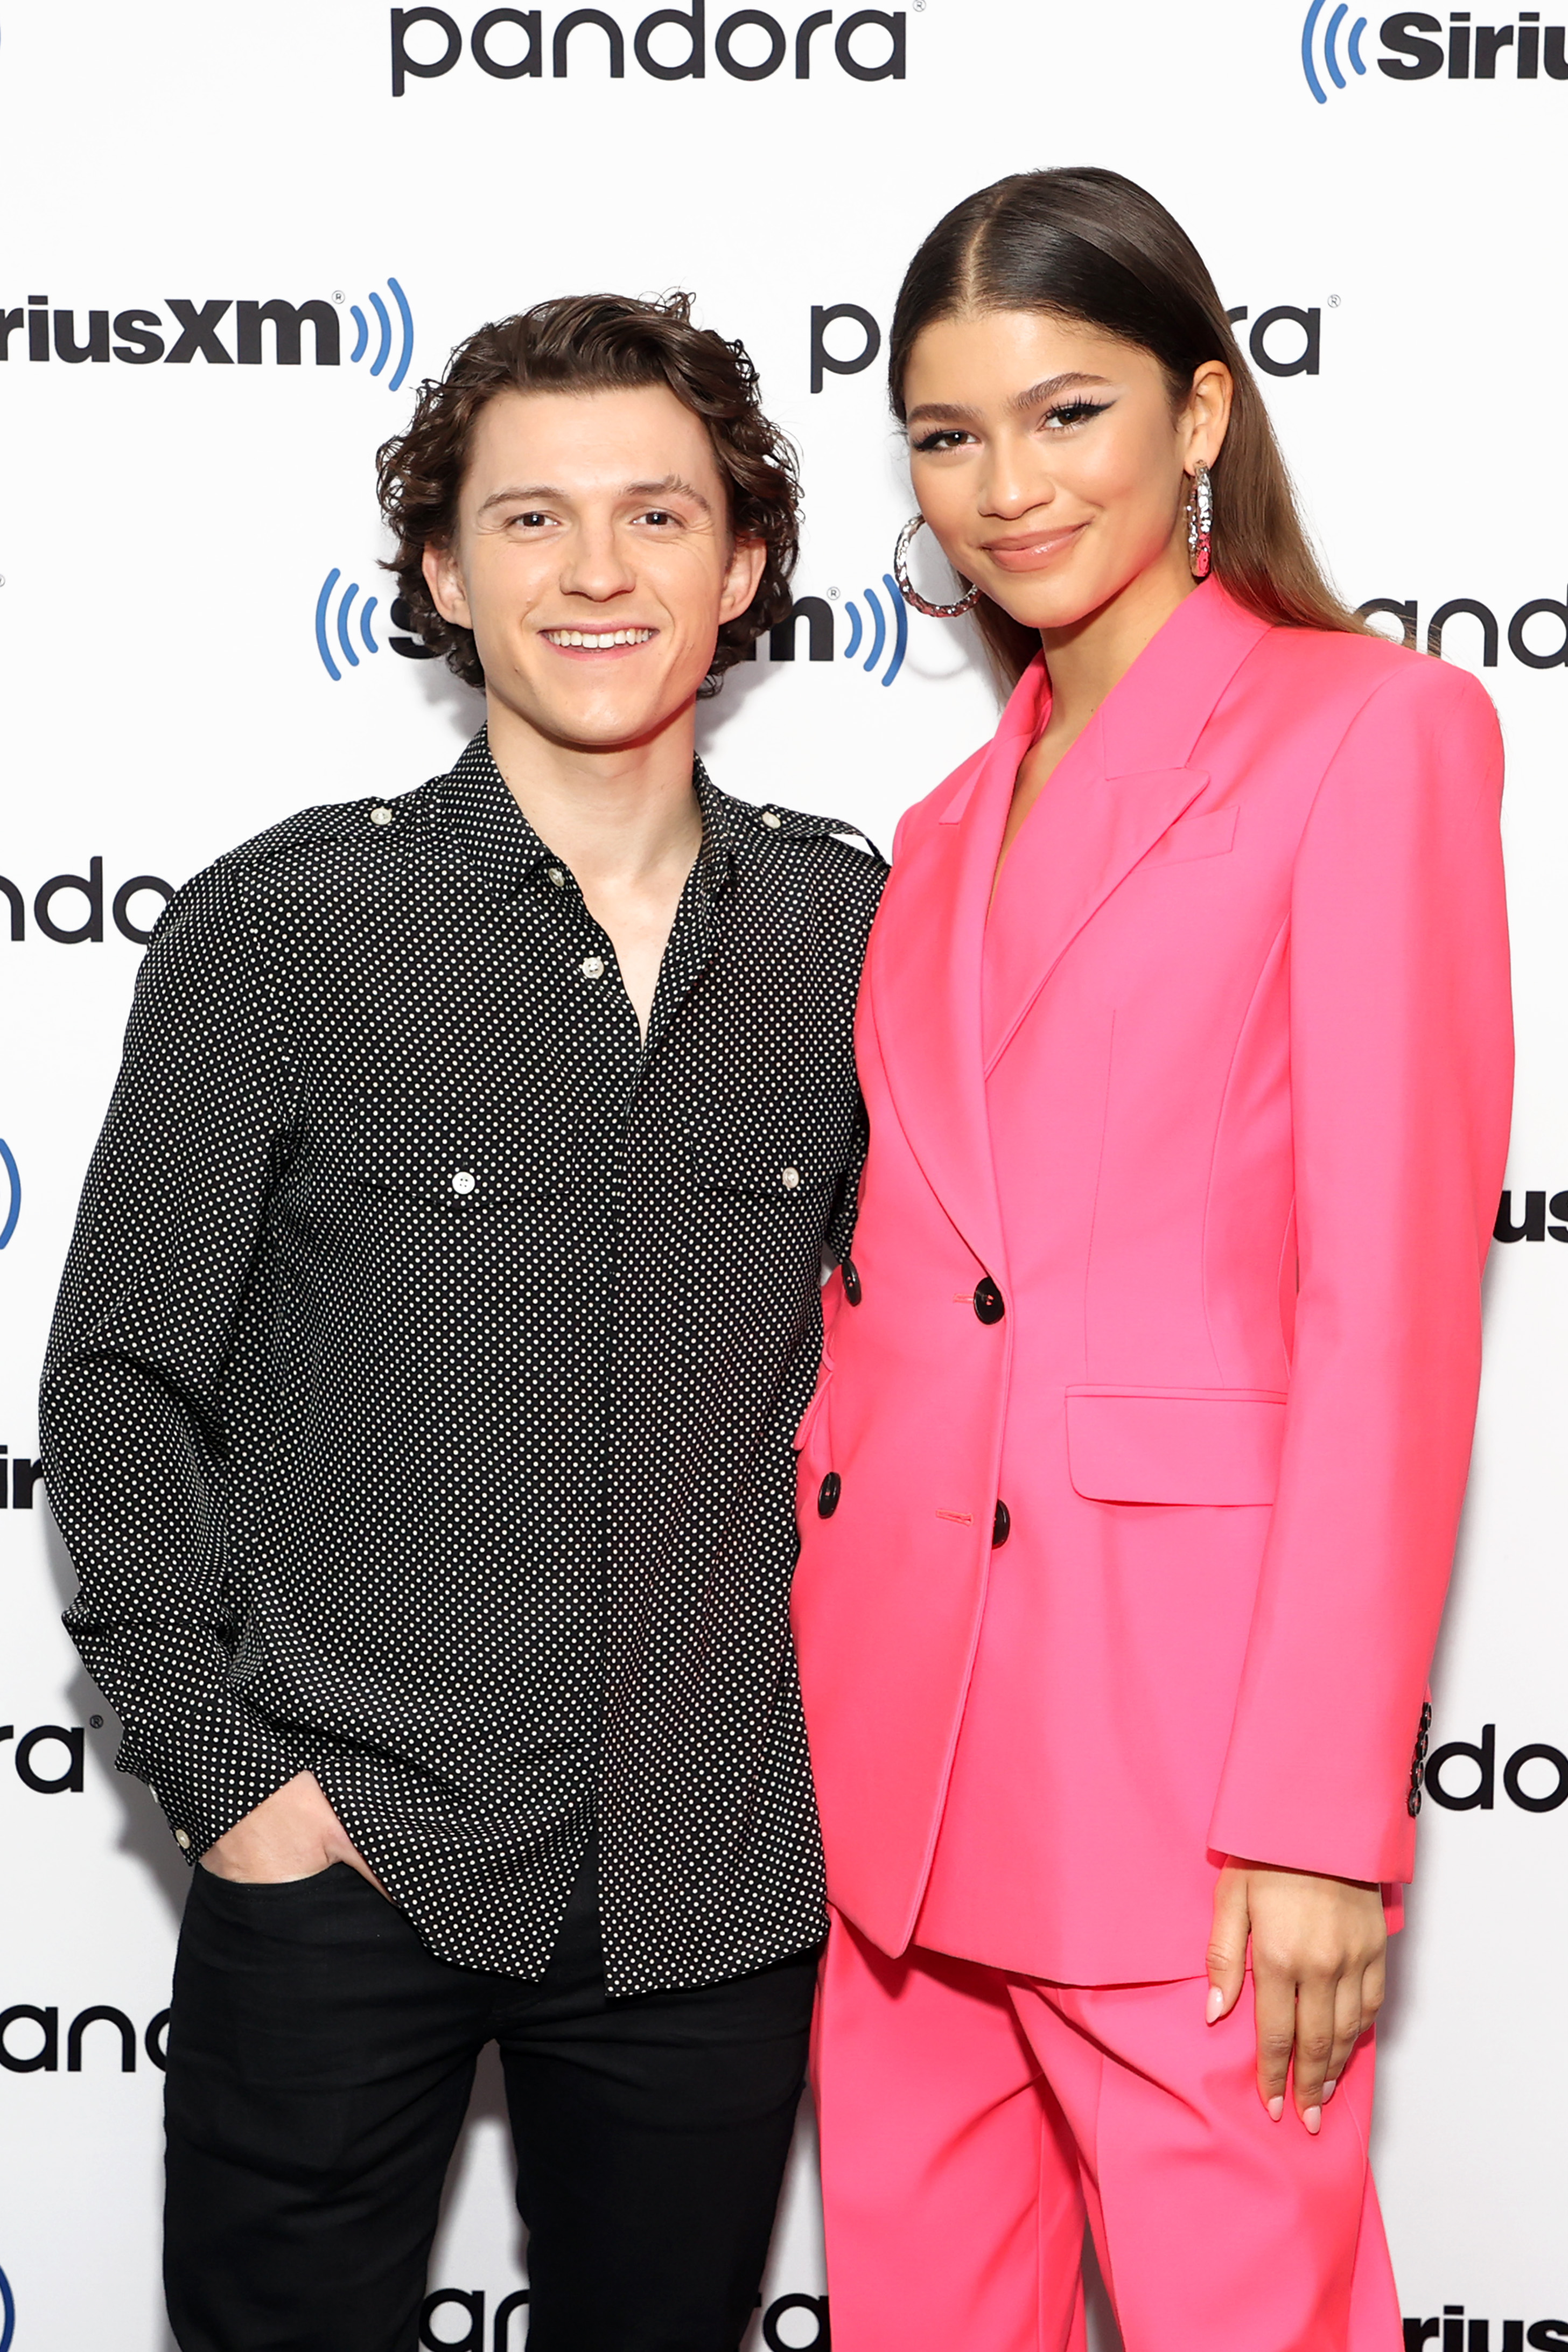 Tom Holland and Zendaya attend SiriusXM's Town Hall with the cast of 'Spider-Man: No Way Home' in New York City, on December 10, 2021. | Source: Getty Images